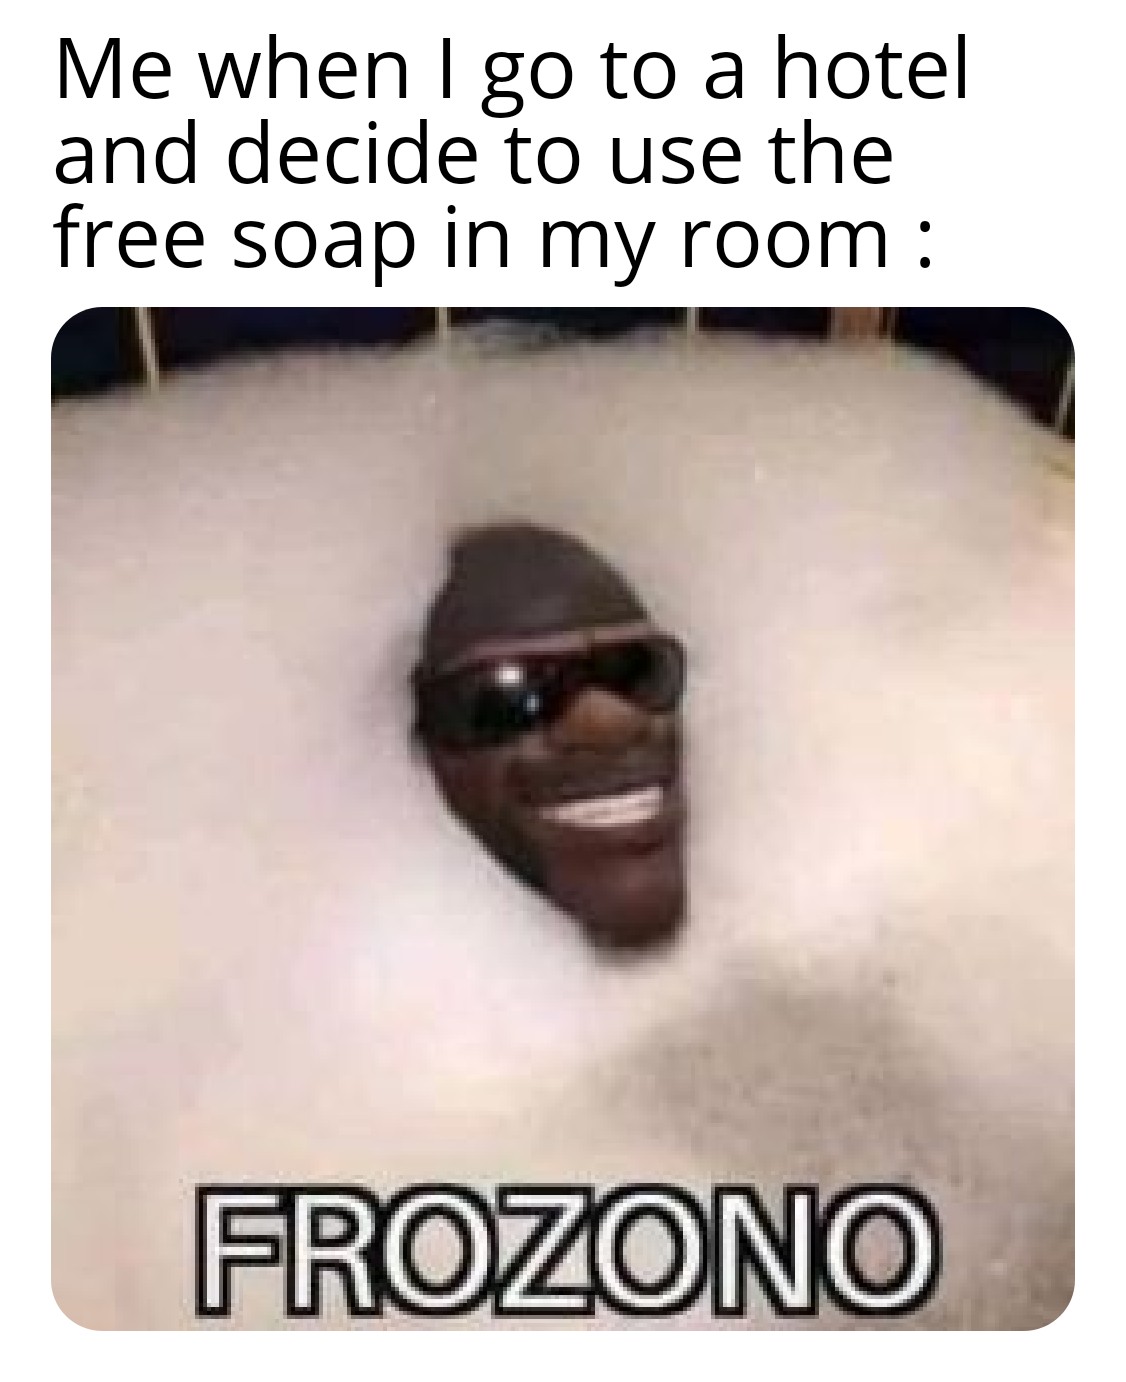 funny memes - Me when I go to a hotel and decide to use the free soap in my room Frozono